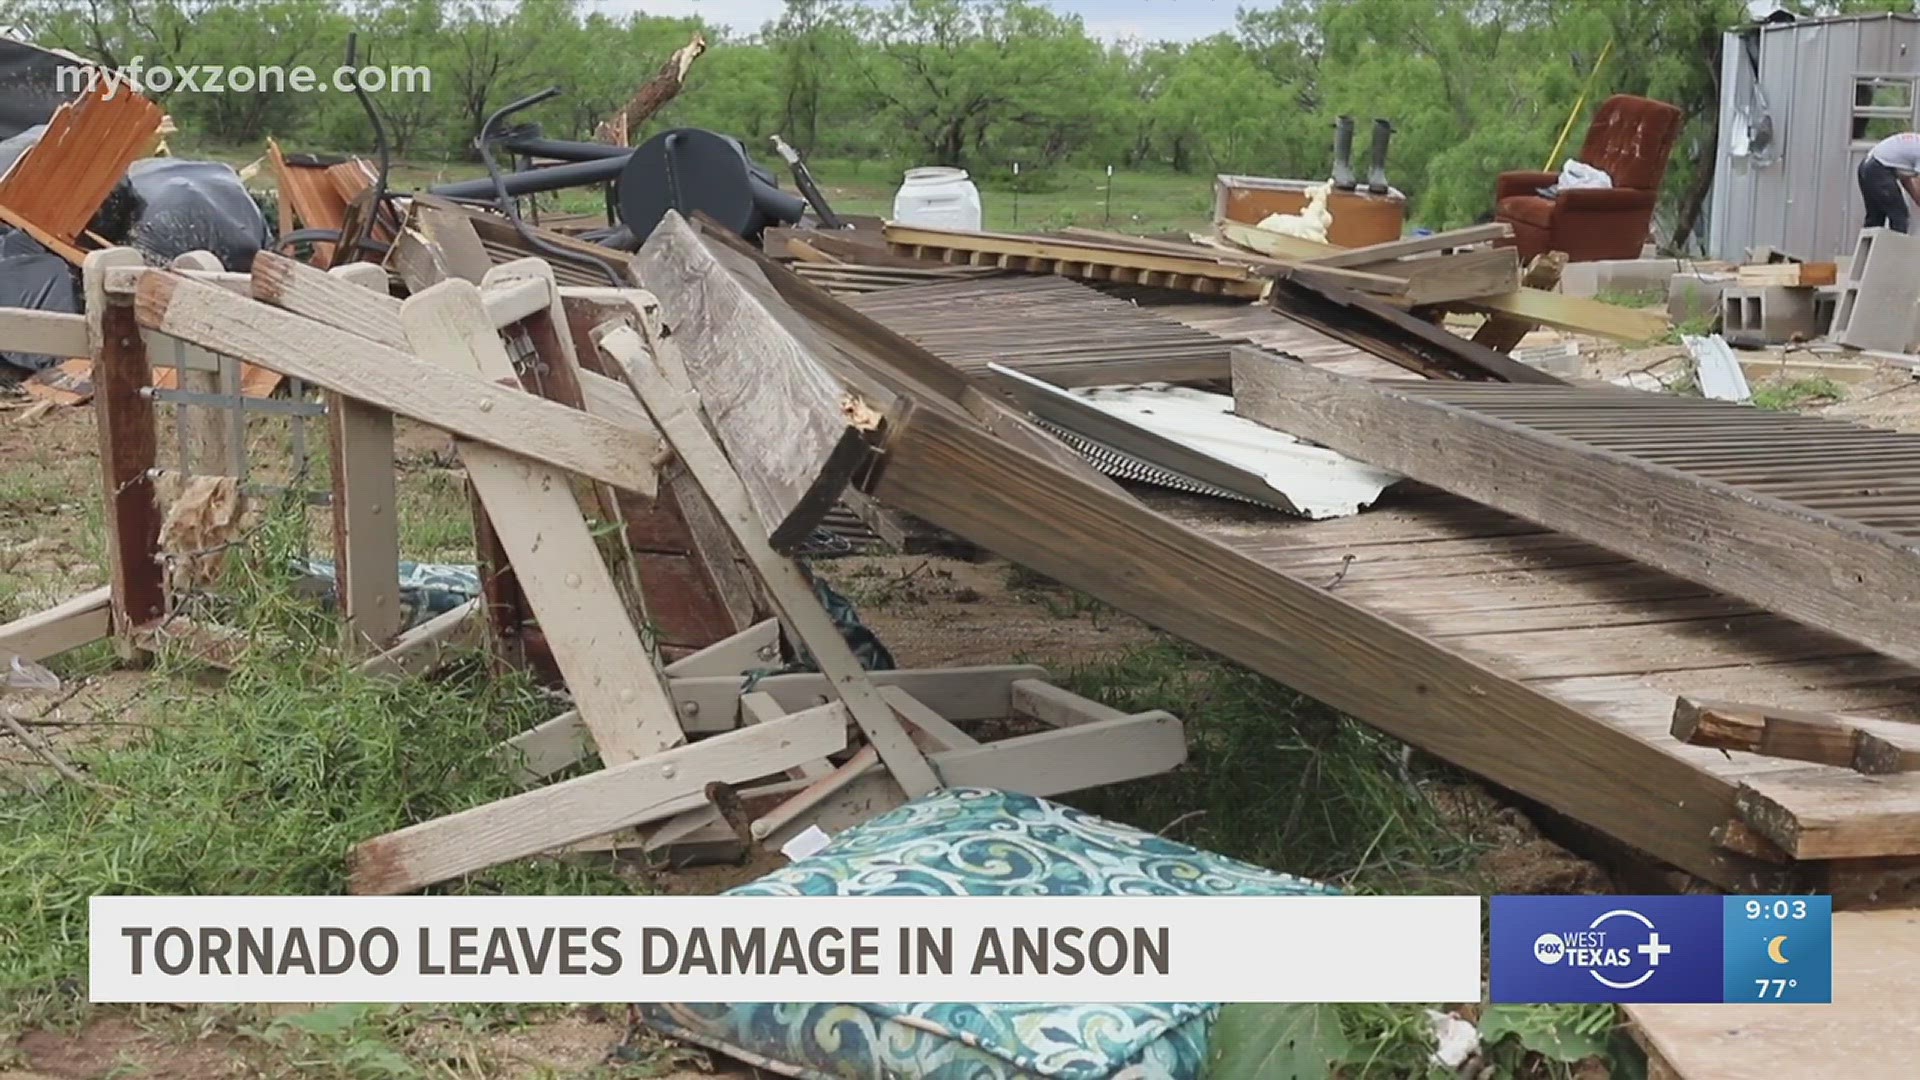 The National Weather Service in San Angelo confirmed a tornado touched down, and destroyed the home of Brandon and Amanda Gall.